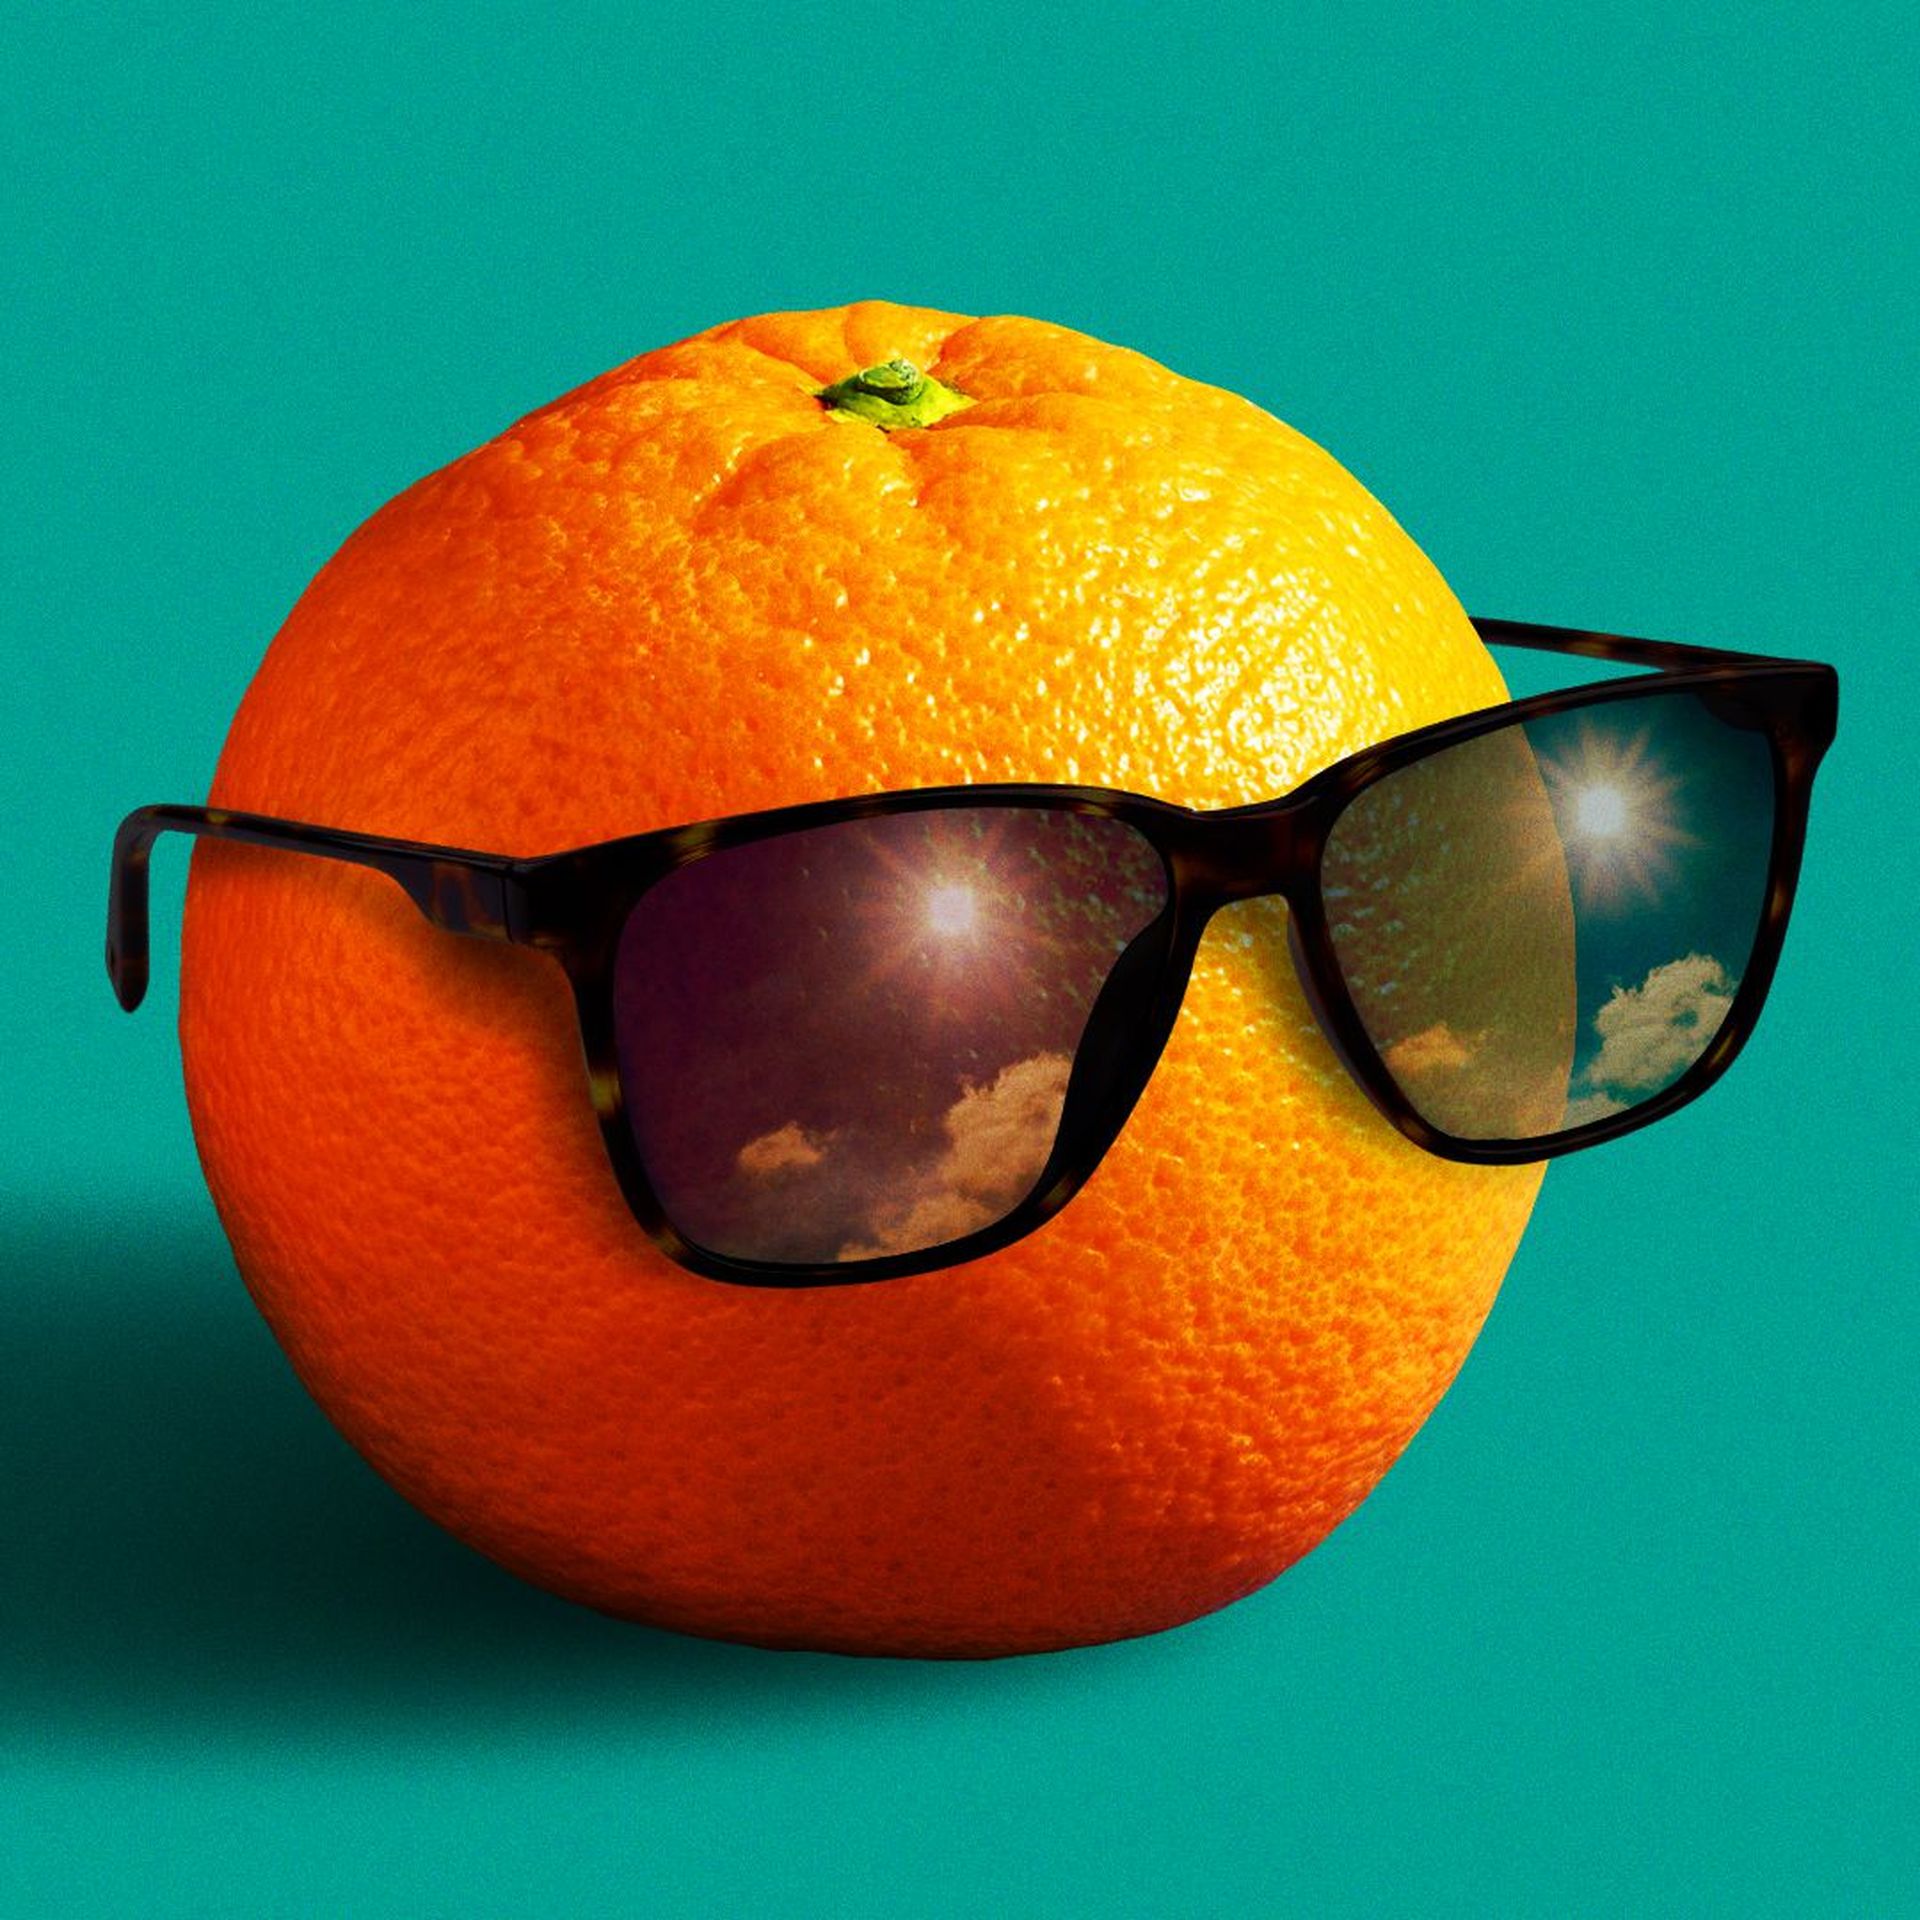 Illustration of an orange with sunglasses on a teal background.